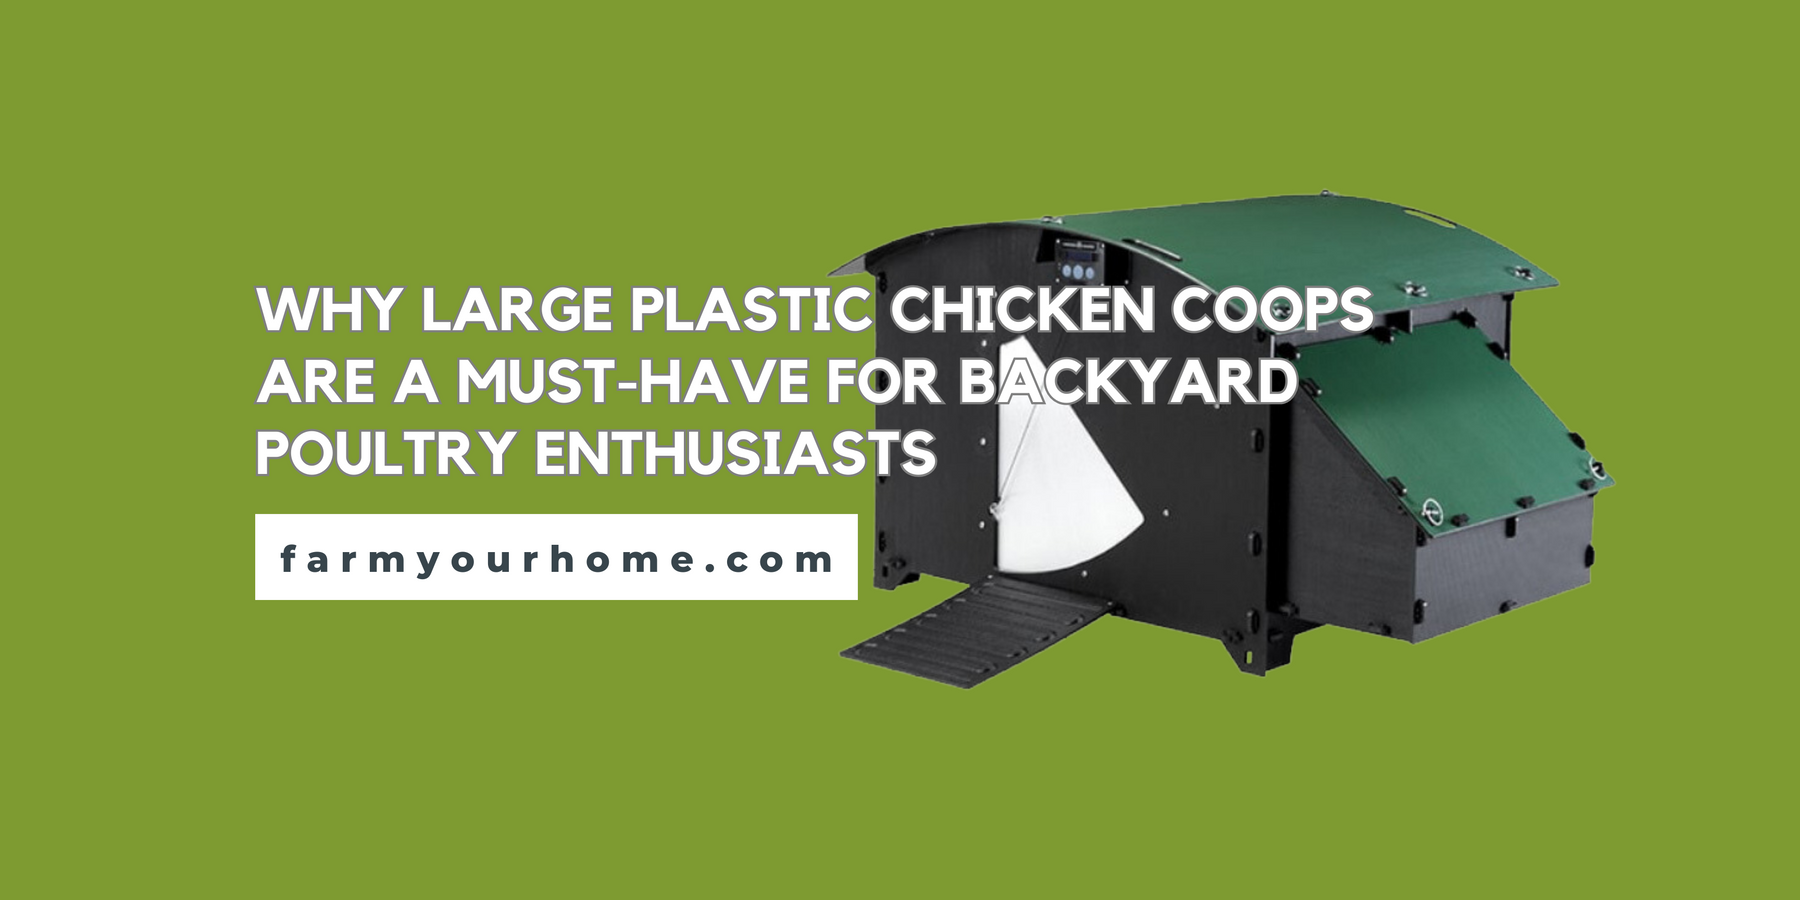 Why Large Plastic Chicken Coops are a Must-Have for Backyard Poultry Enthusiasts Blog Post